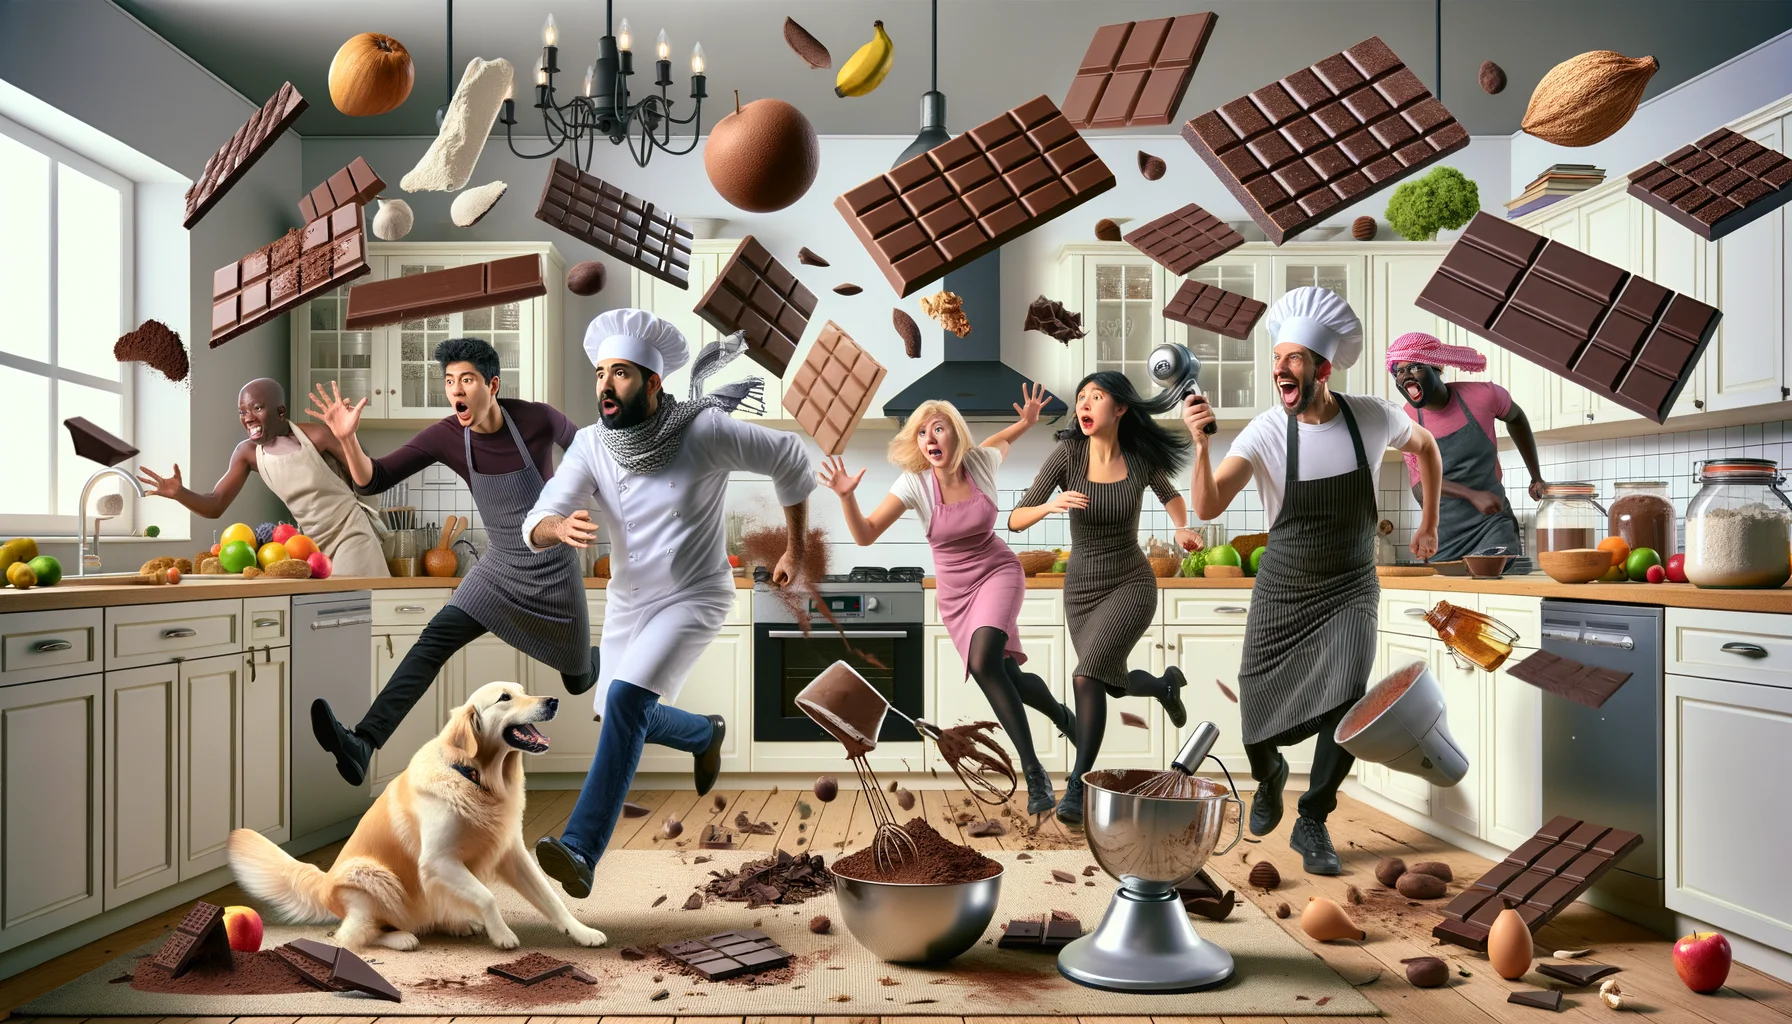 Imagine a humorous, realistic scene depicting the idea of 'Low-Fat Chocolate Alternatives'. Picture this: multiple people of different genders and descents, such as a Middle-Eastern man and a Hispanic woman, both wearing chef's hats and aprons, caught in a mad dash in a brightly lit modern kitchen. They are juggling various low-fat chocolate alternatives like dark chocolate, cocoa nibs, chocolate protein powder, and carob. A golden retriever dog plays nearby, trying to catch the flying 'chocolates'. Make the surroundings comically chaotic with ingredients like fruits and nuts scattering around, mixers running wild and a mess of recipe books all with a tagline that says 'The Perfect Low-Fat Chocolate Alternative Scenario!'